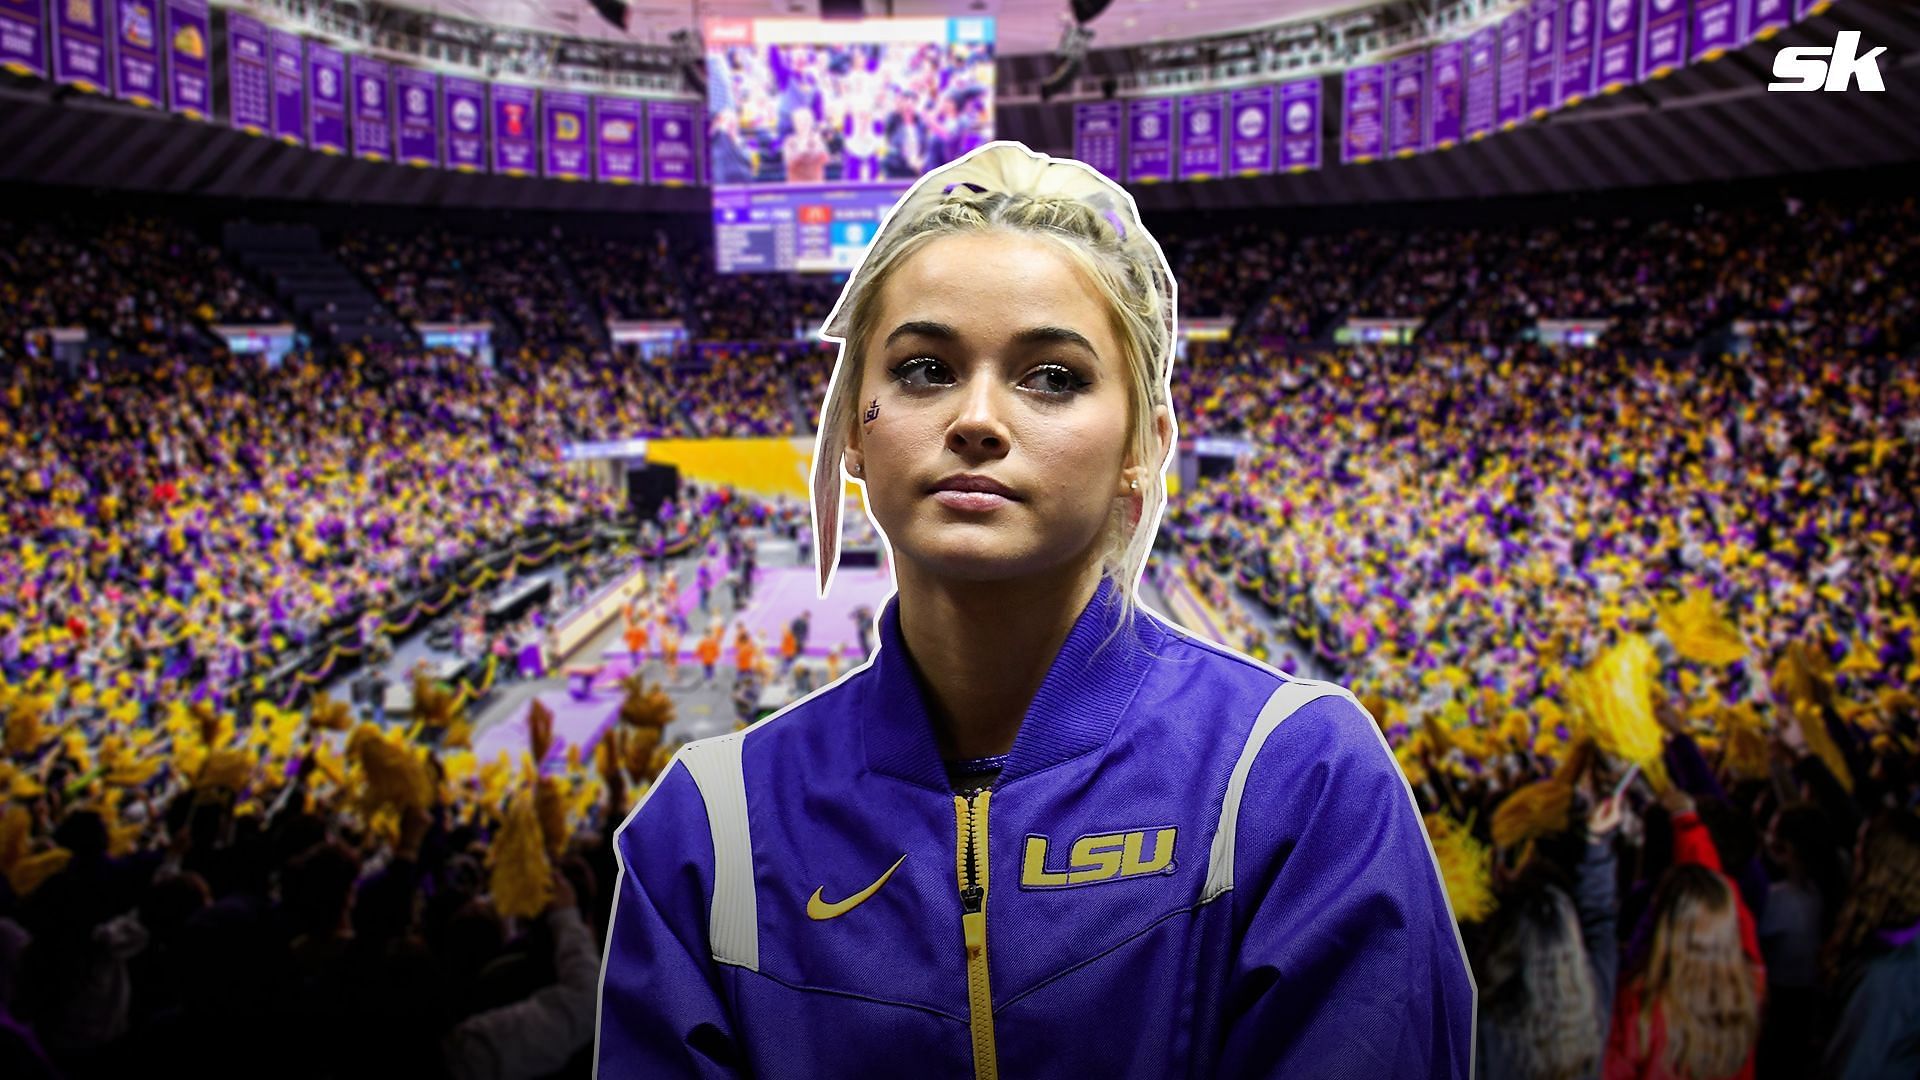 Successive absences from two gymnastics meets have led fans to question the health status of LSU gymnast Olivia Dunne